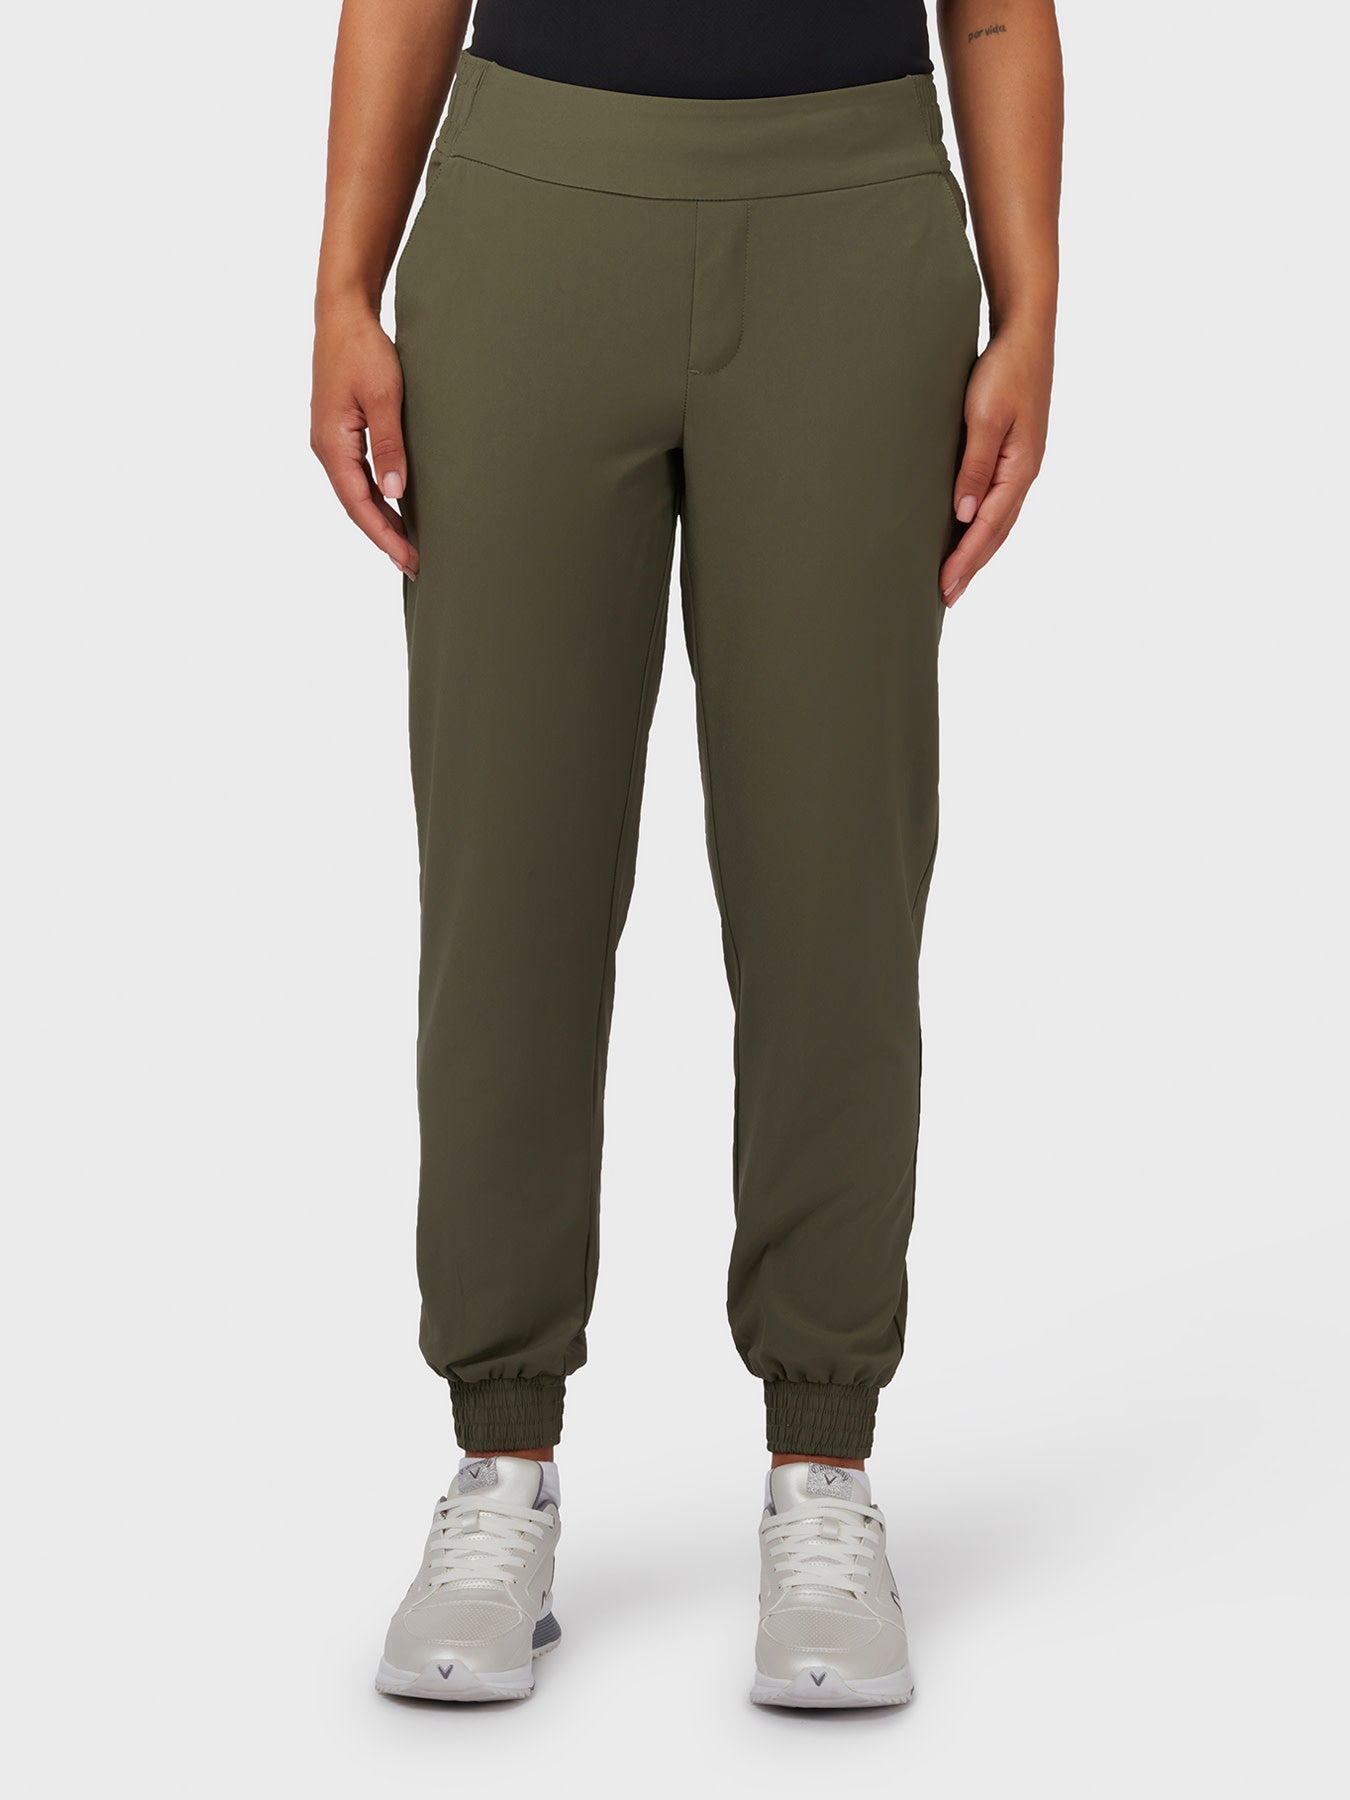 View Lightweight Womens Joggers In Industrial Green Industrial Green XL information